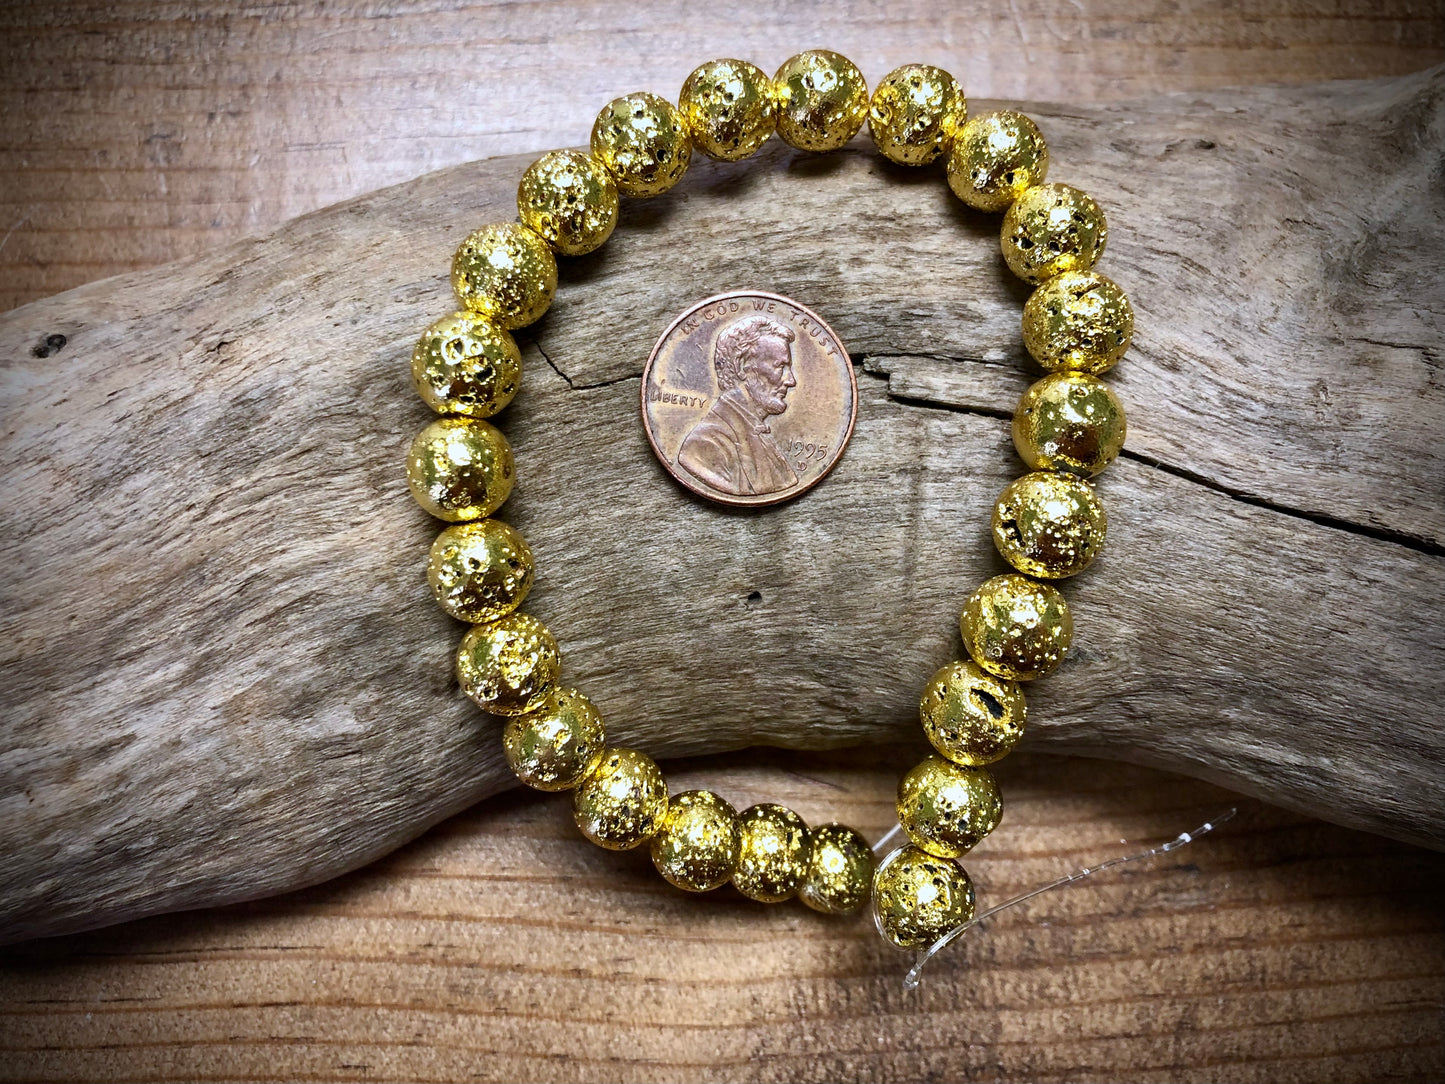 Electro-Coated Lava Bead Strand - Yellow Gold - 8mm - 8”